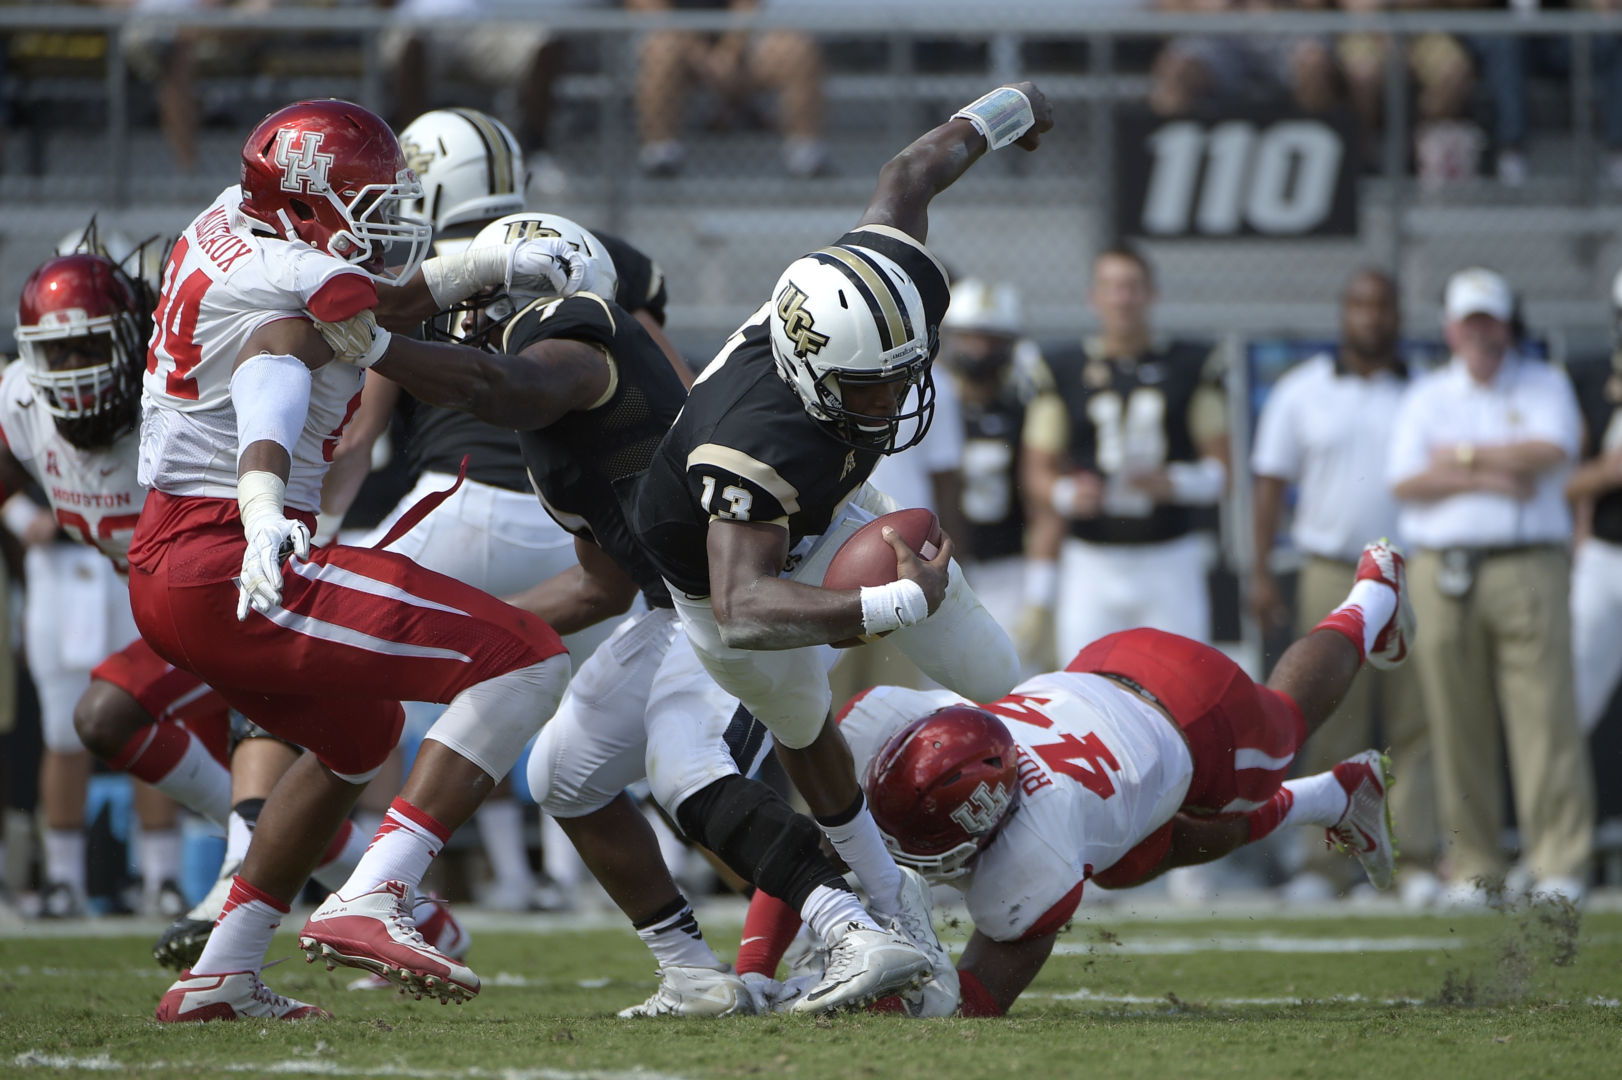 No. 15 UCF remains the only AAC team currently ranked. The Cougars and the Knights face off on Nov. 2 in Orlando, Florida. | File photo